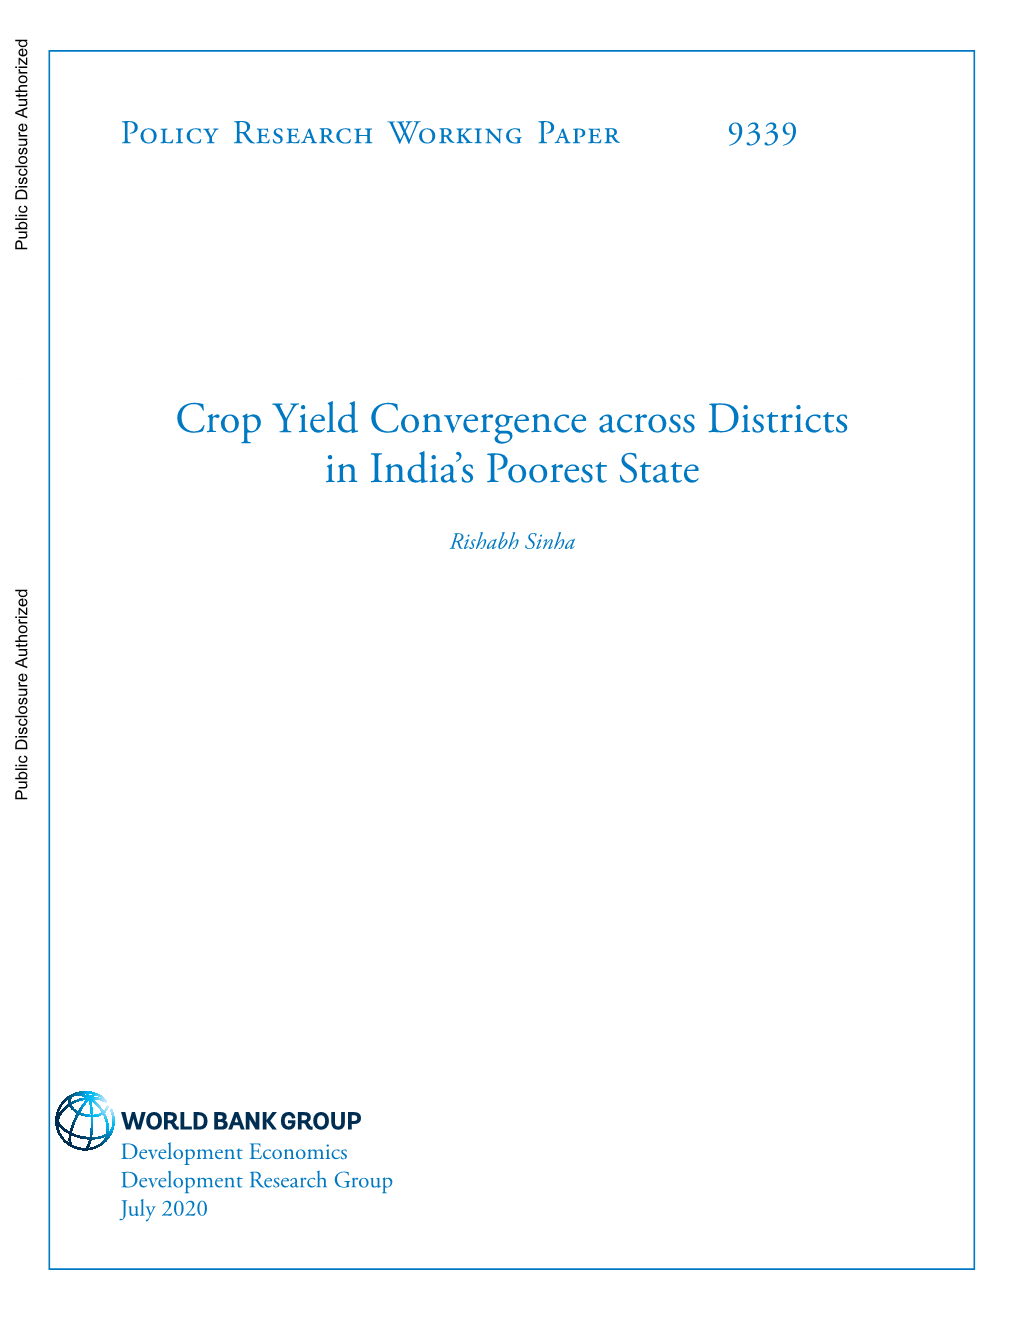 Crop Yield Convergence Across Districts in India’S Poorest State